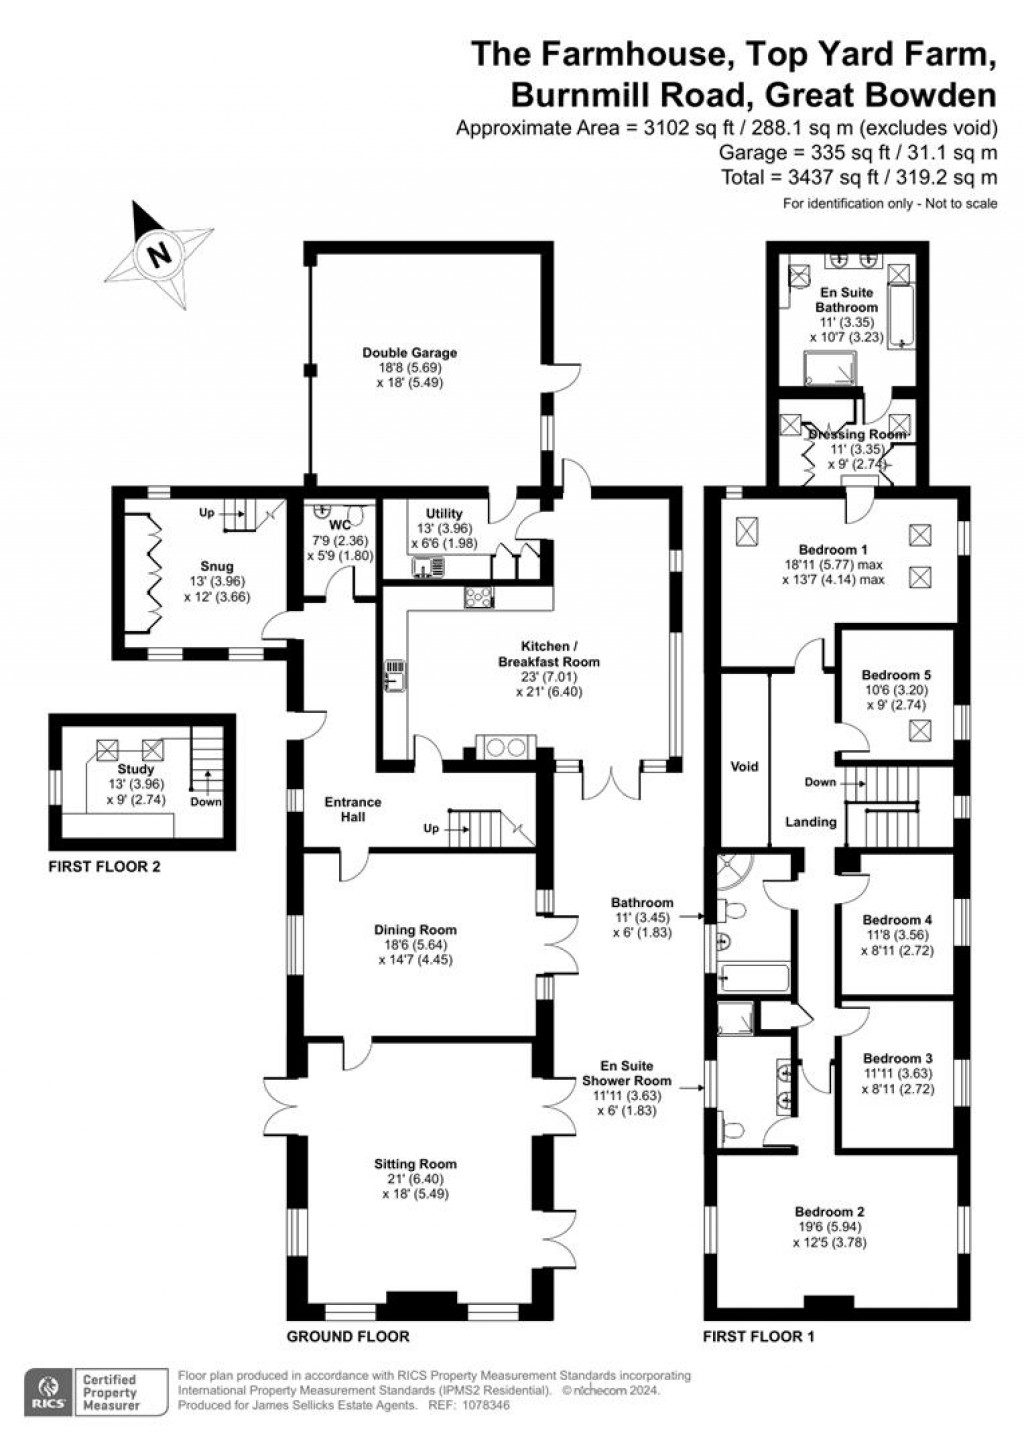 Floorplans For The Farmhouse, Top Yard Farm, Burnmill Road, Great Bowden, Leicestershire